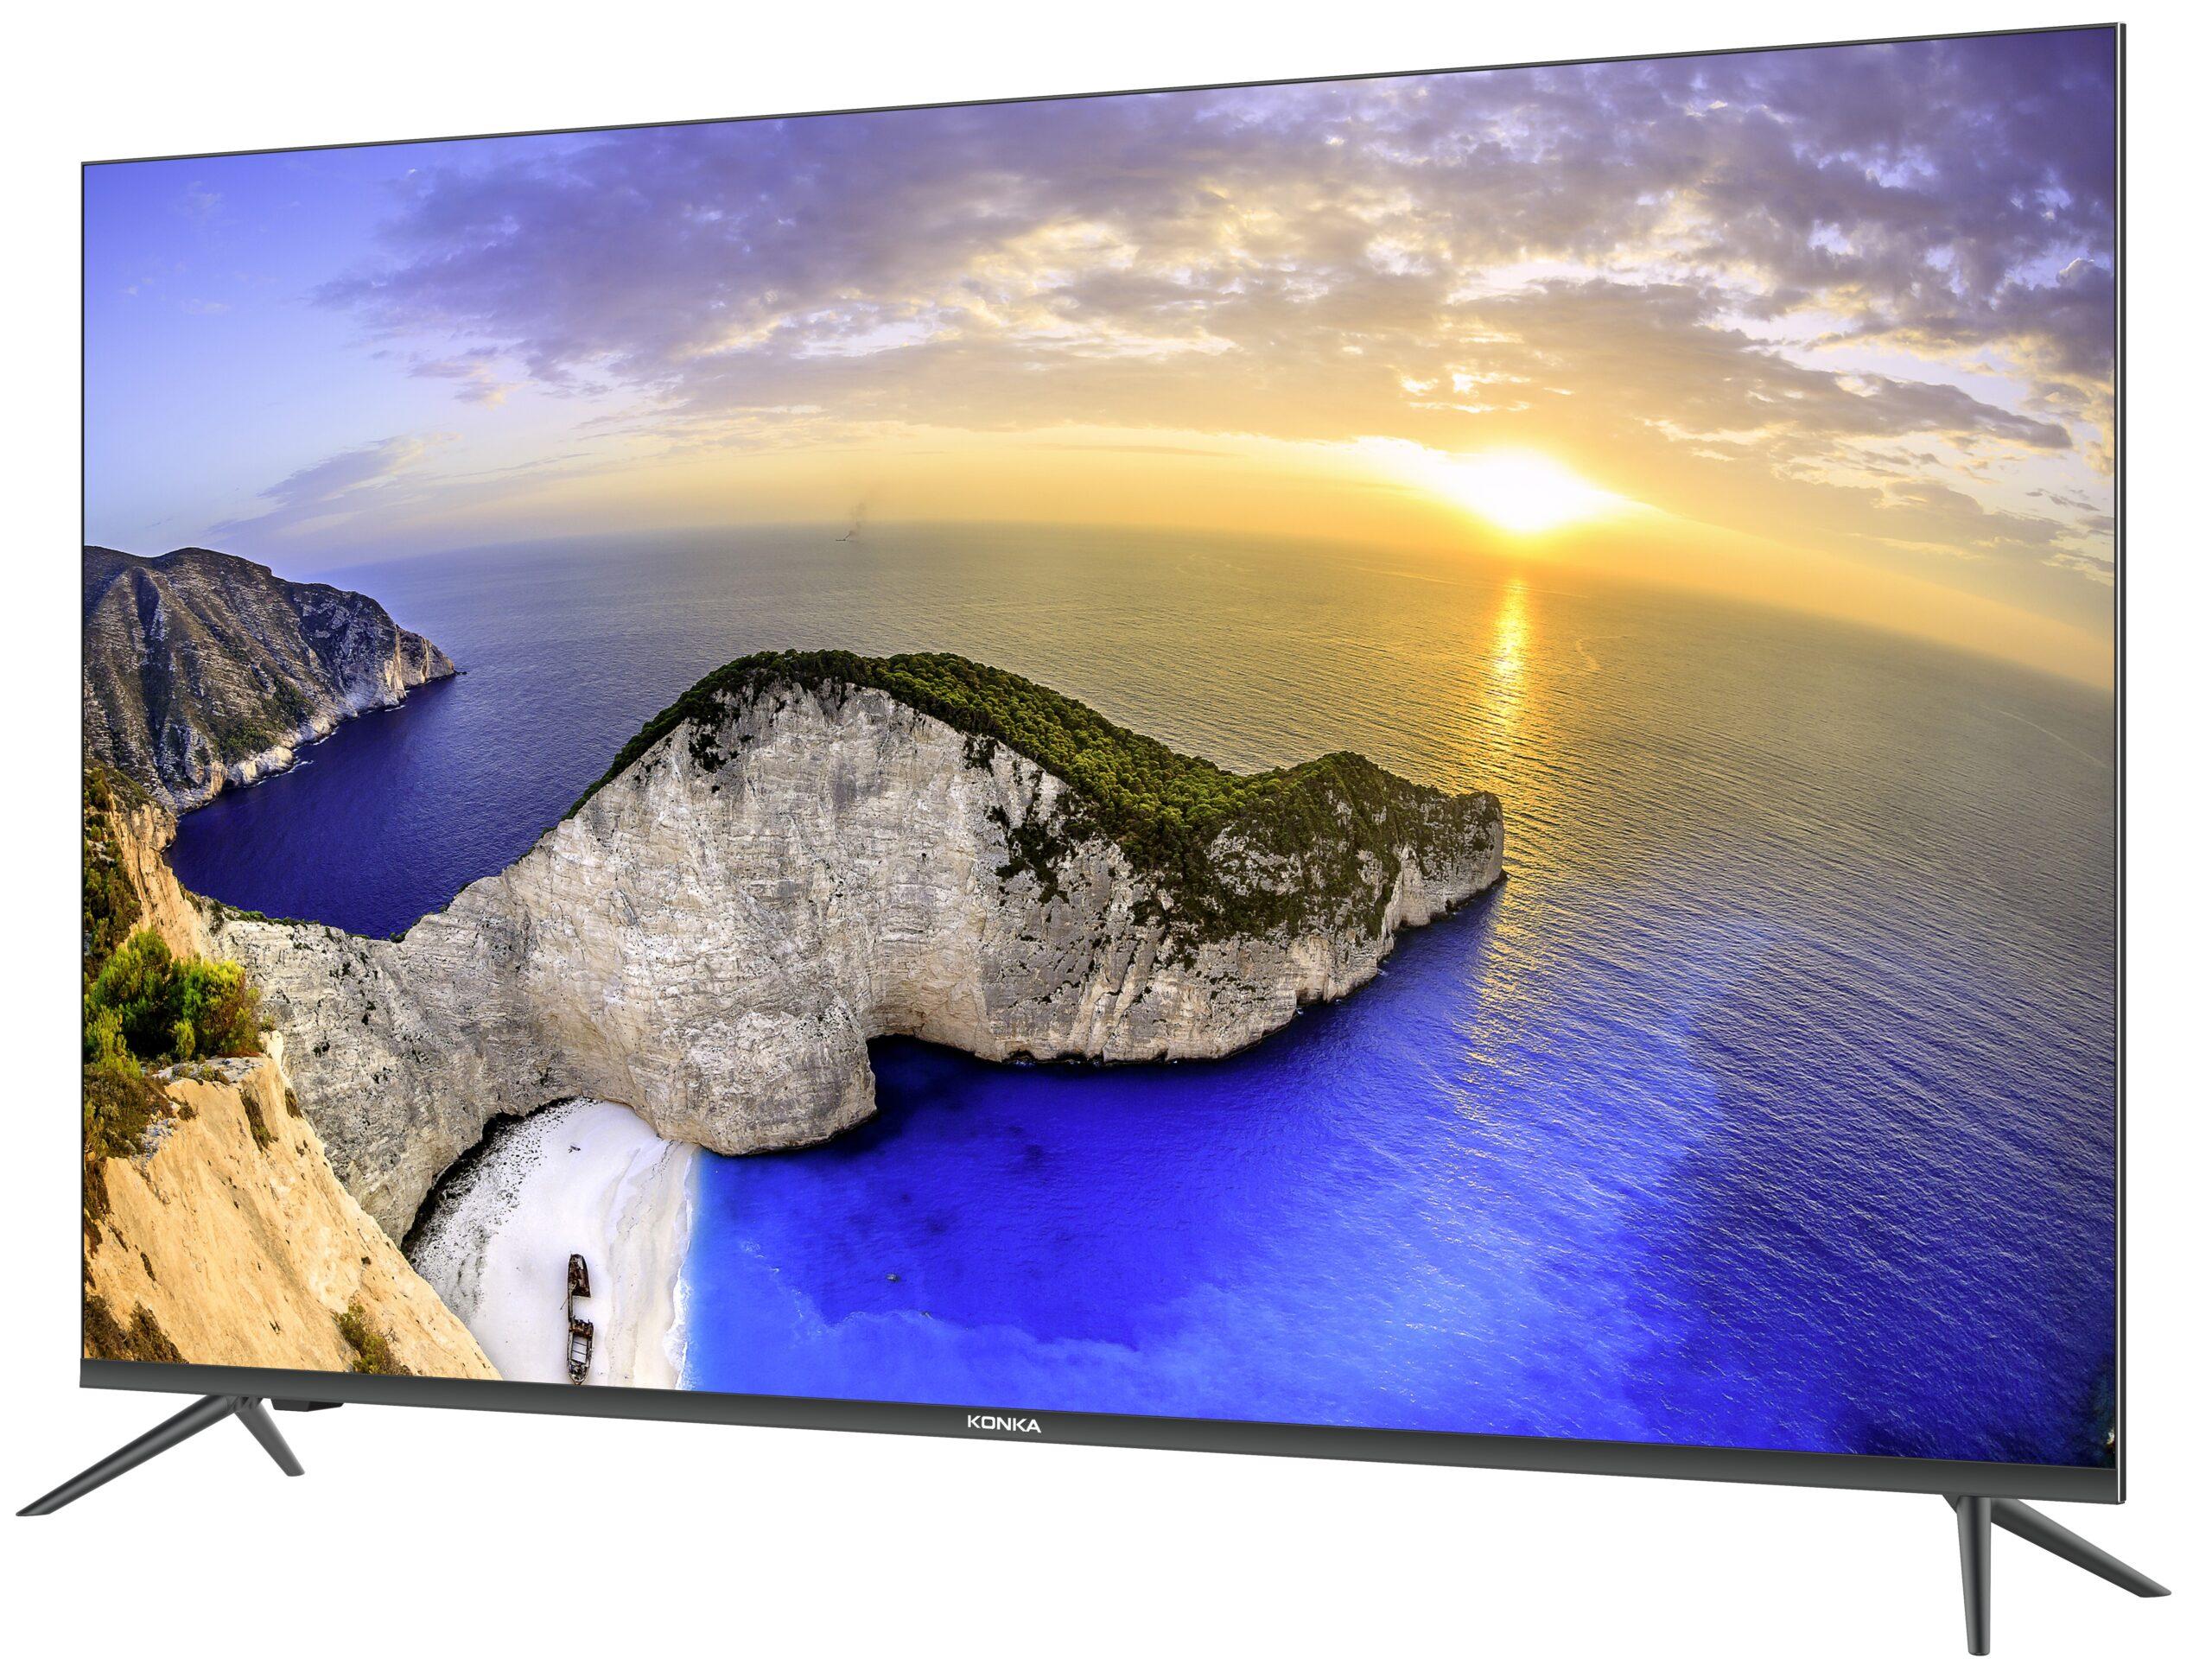 The Q7 Pro Series from Konka is not without its flaws, but it outperforms some similarly priced displays, making it an intriguing new competitor in the budget-TV marketplace in the U.S. konka bf5d5390 konka q7 series front 45 degree angle left in screen 1 scaled